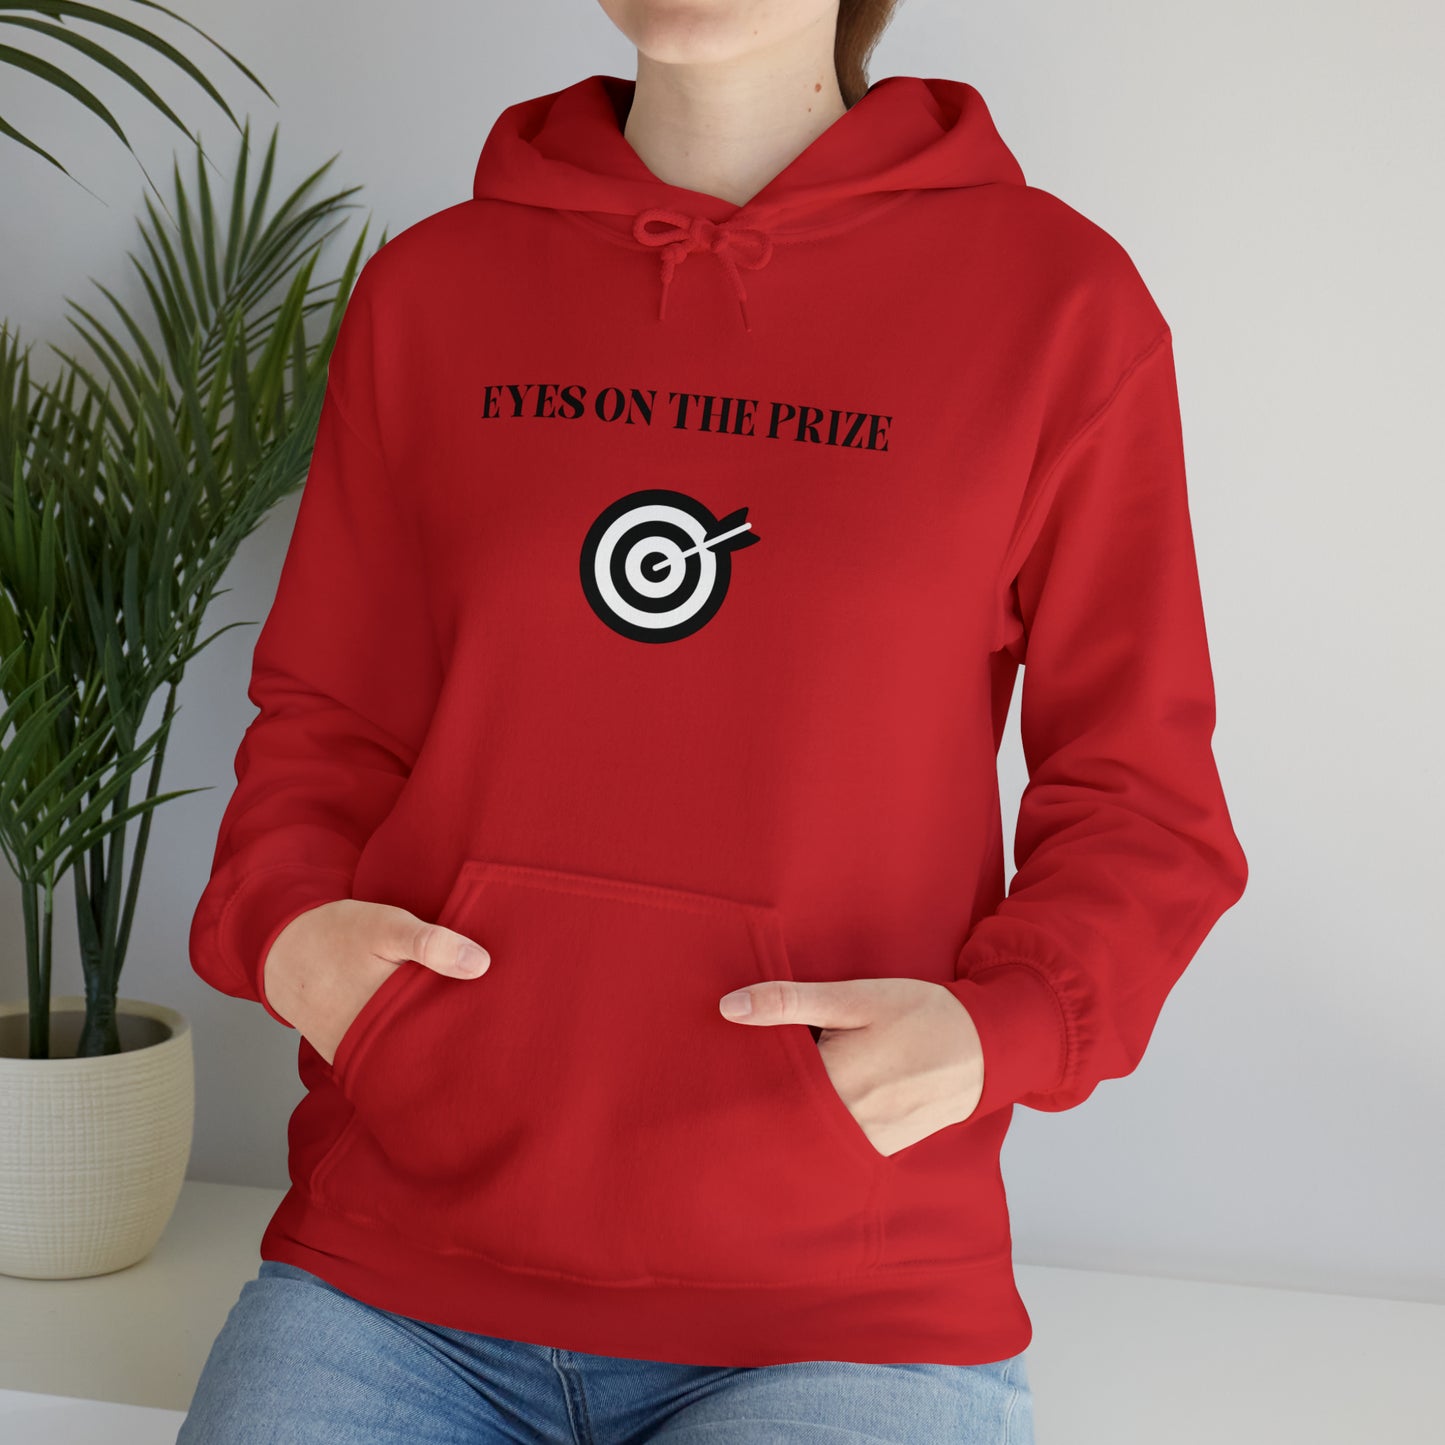 Eyes on the prize Blend Hooded Sweatshirt gift, inspirational words hoodie gift, sweatshirt gift that eacourages